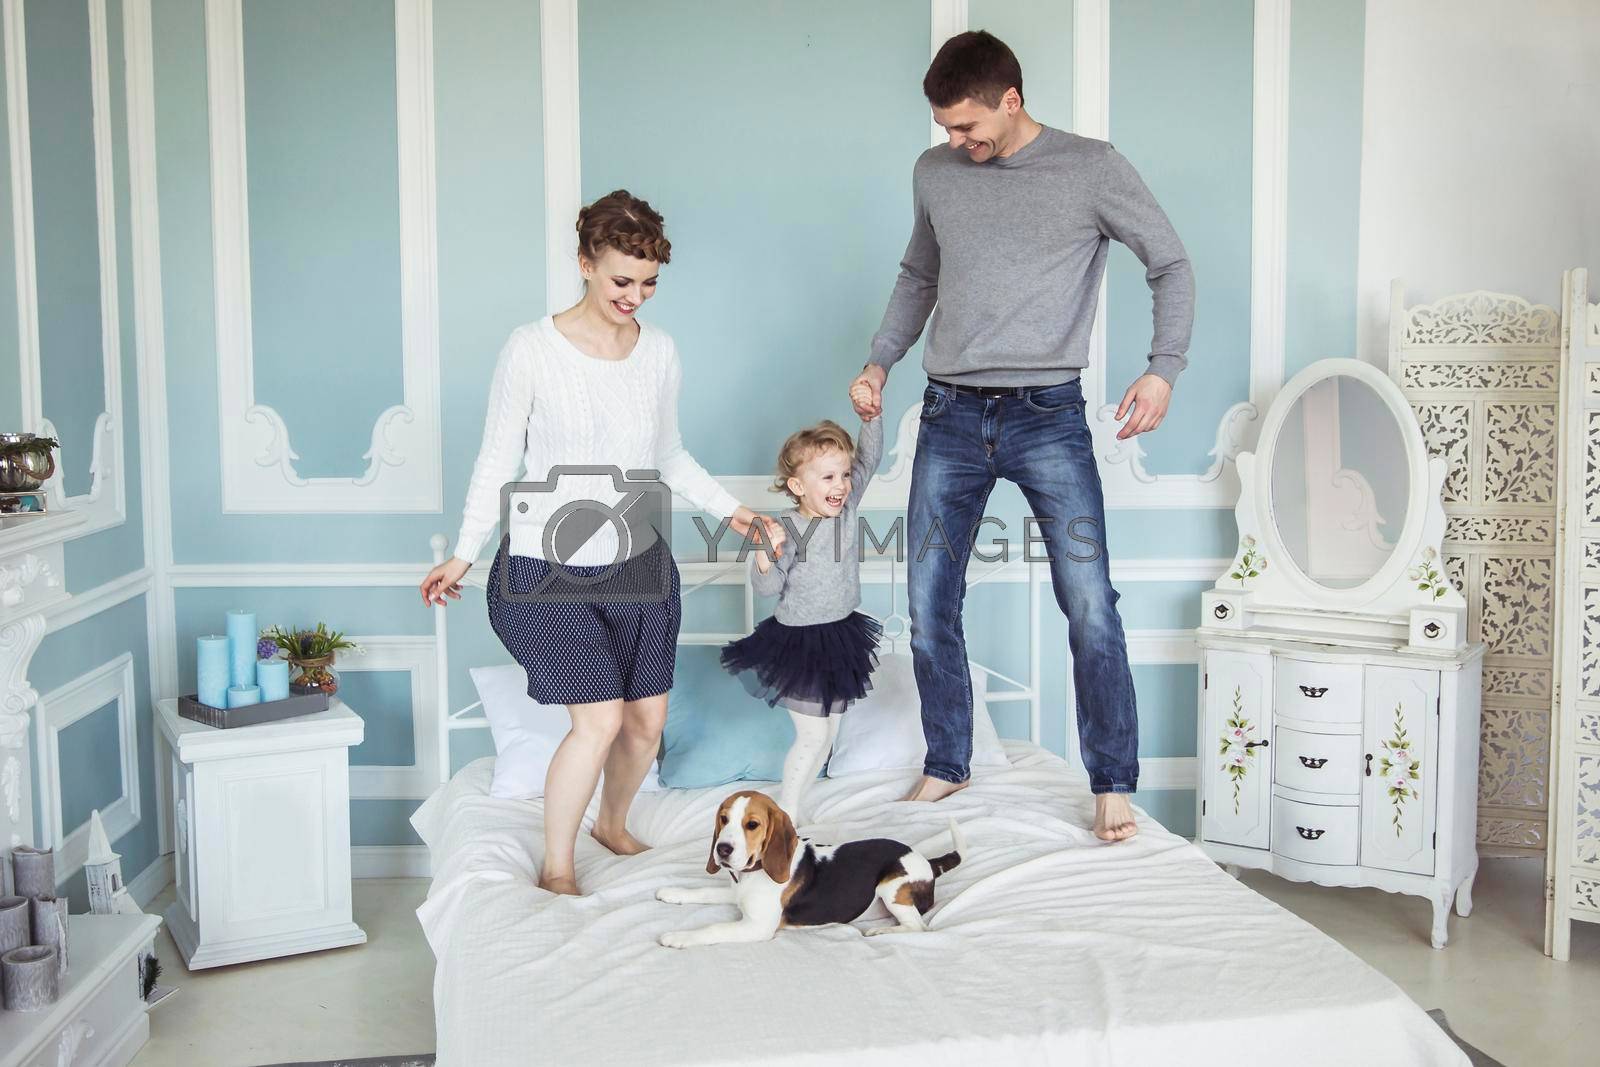 Royalty free image of concept of family happiness: loving parents playing with baby daughter on bed in bedroom by SmartPhotoLab